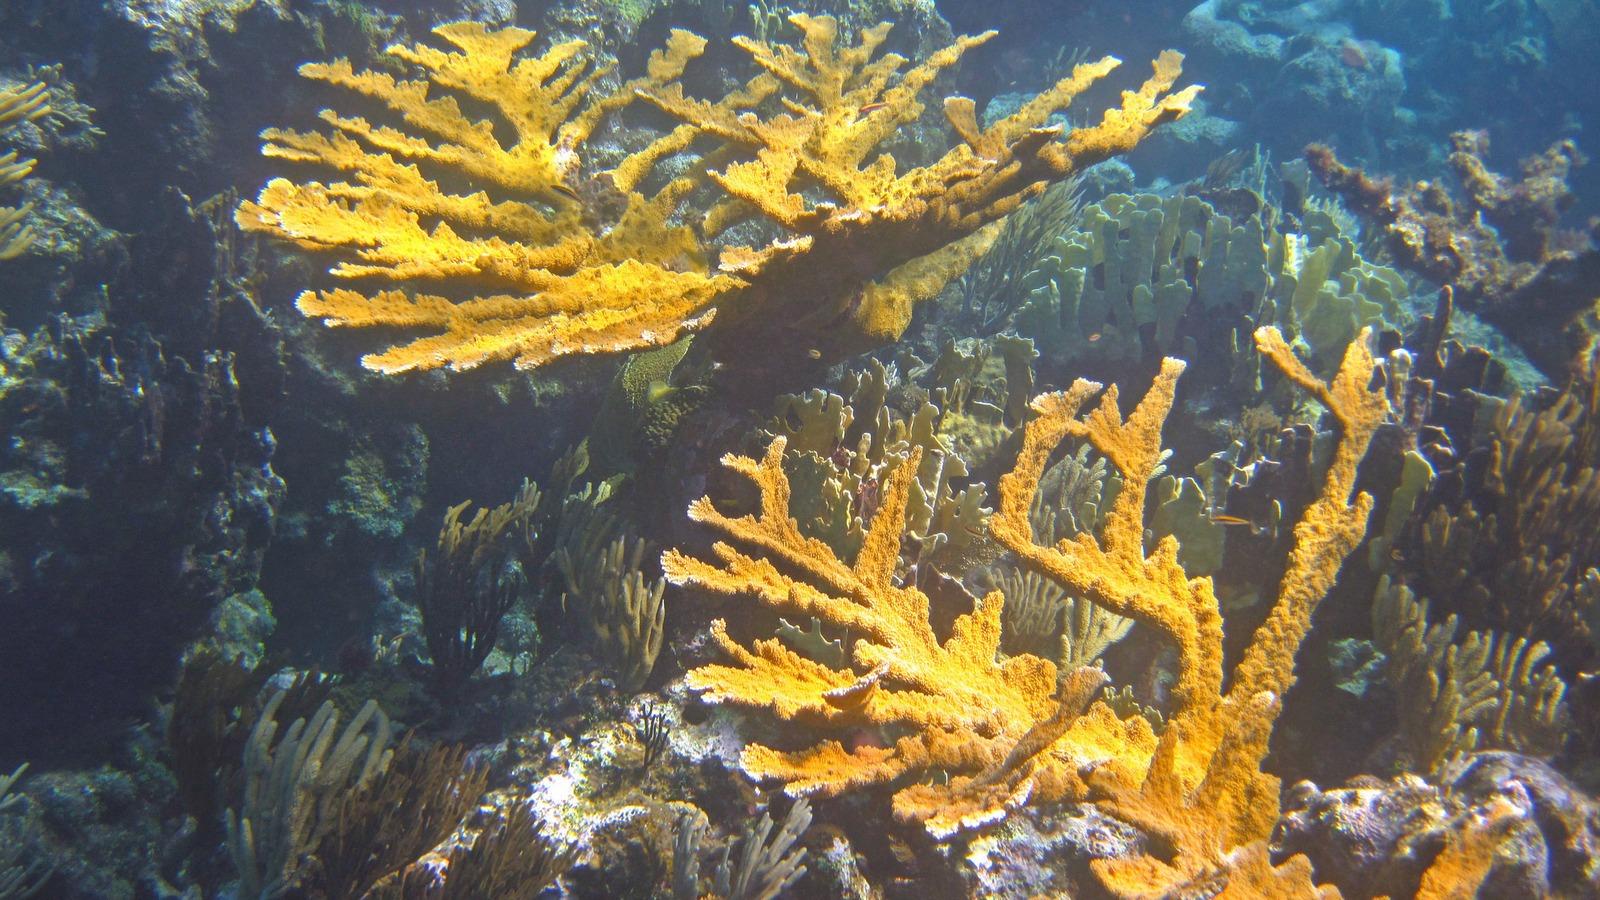 Elkhorn coral is one of the main varieties of coral that workers on the northern coast of Puerto Rico have been able to restore following damage done by Hurricane Maria in 2017.  